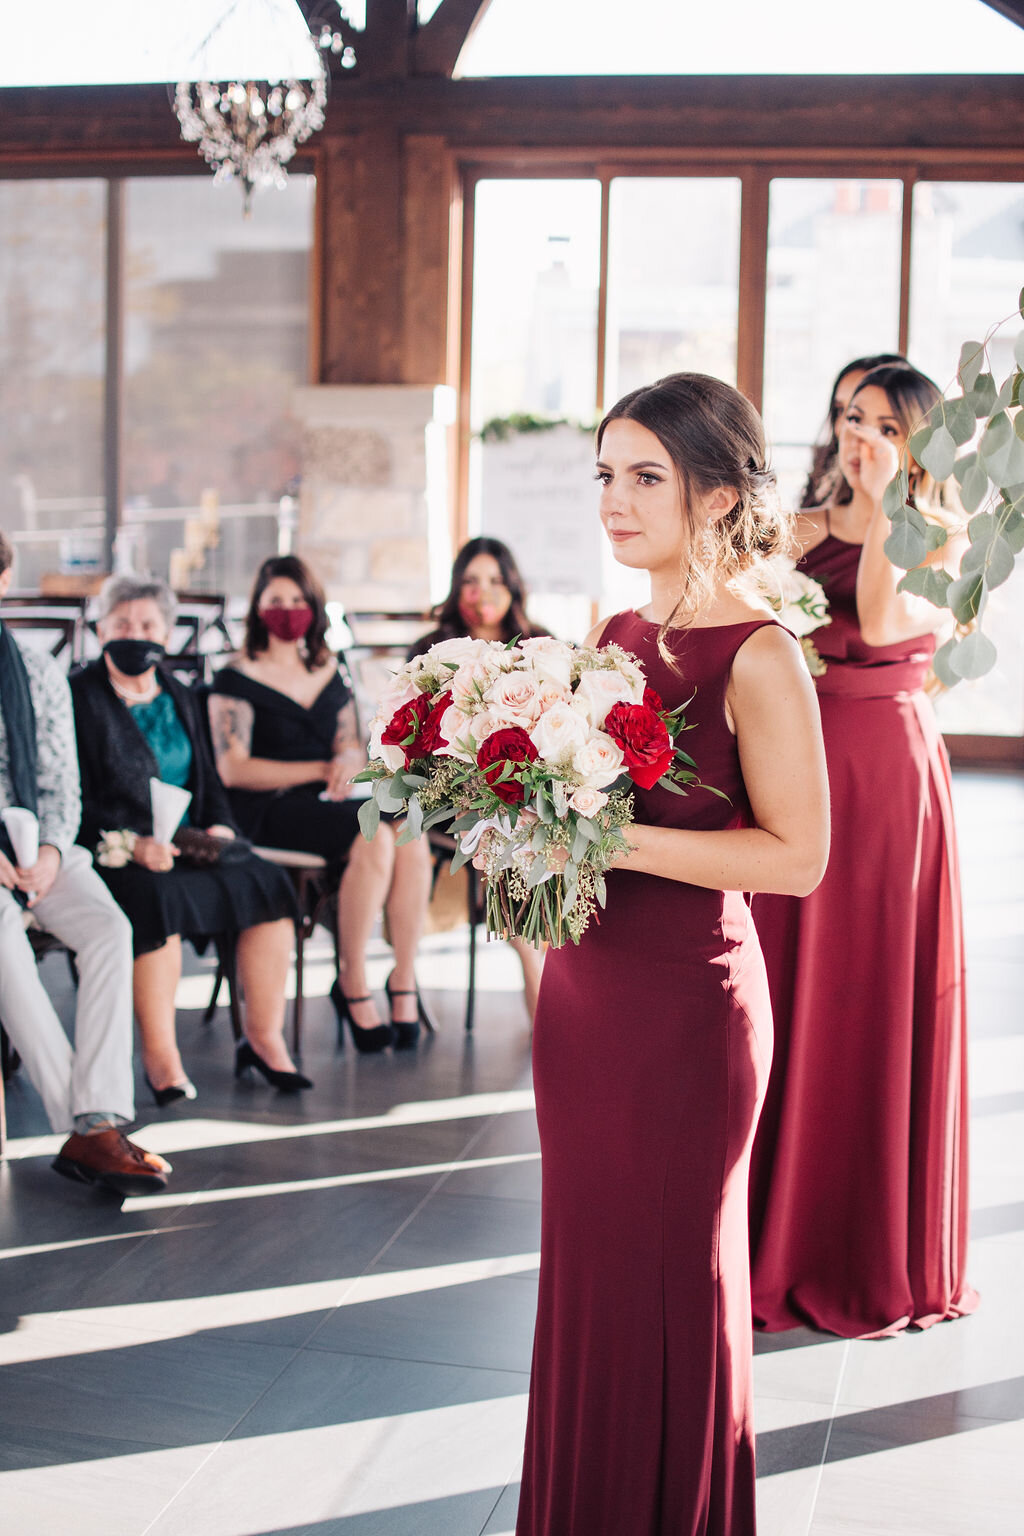 Bride and groom have an emotional wedding day at Cambridge Mill photographed by Toronto wedding photographers, Ugo Photography